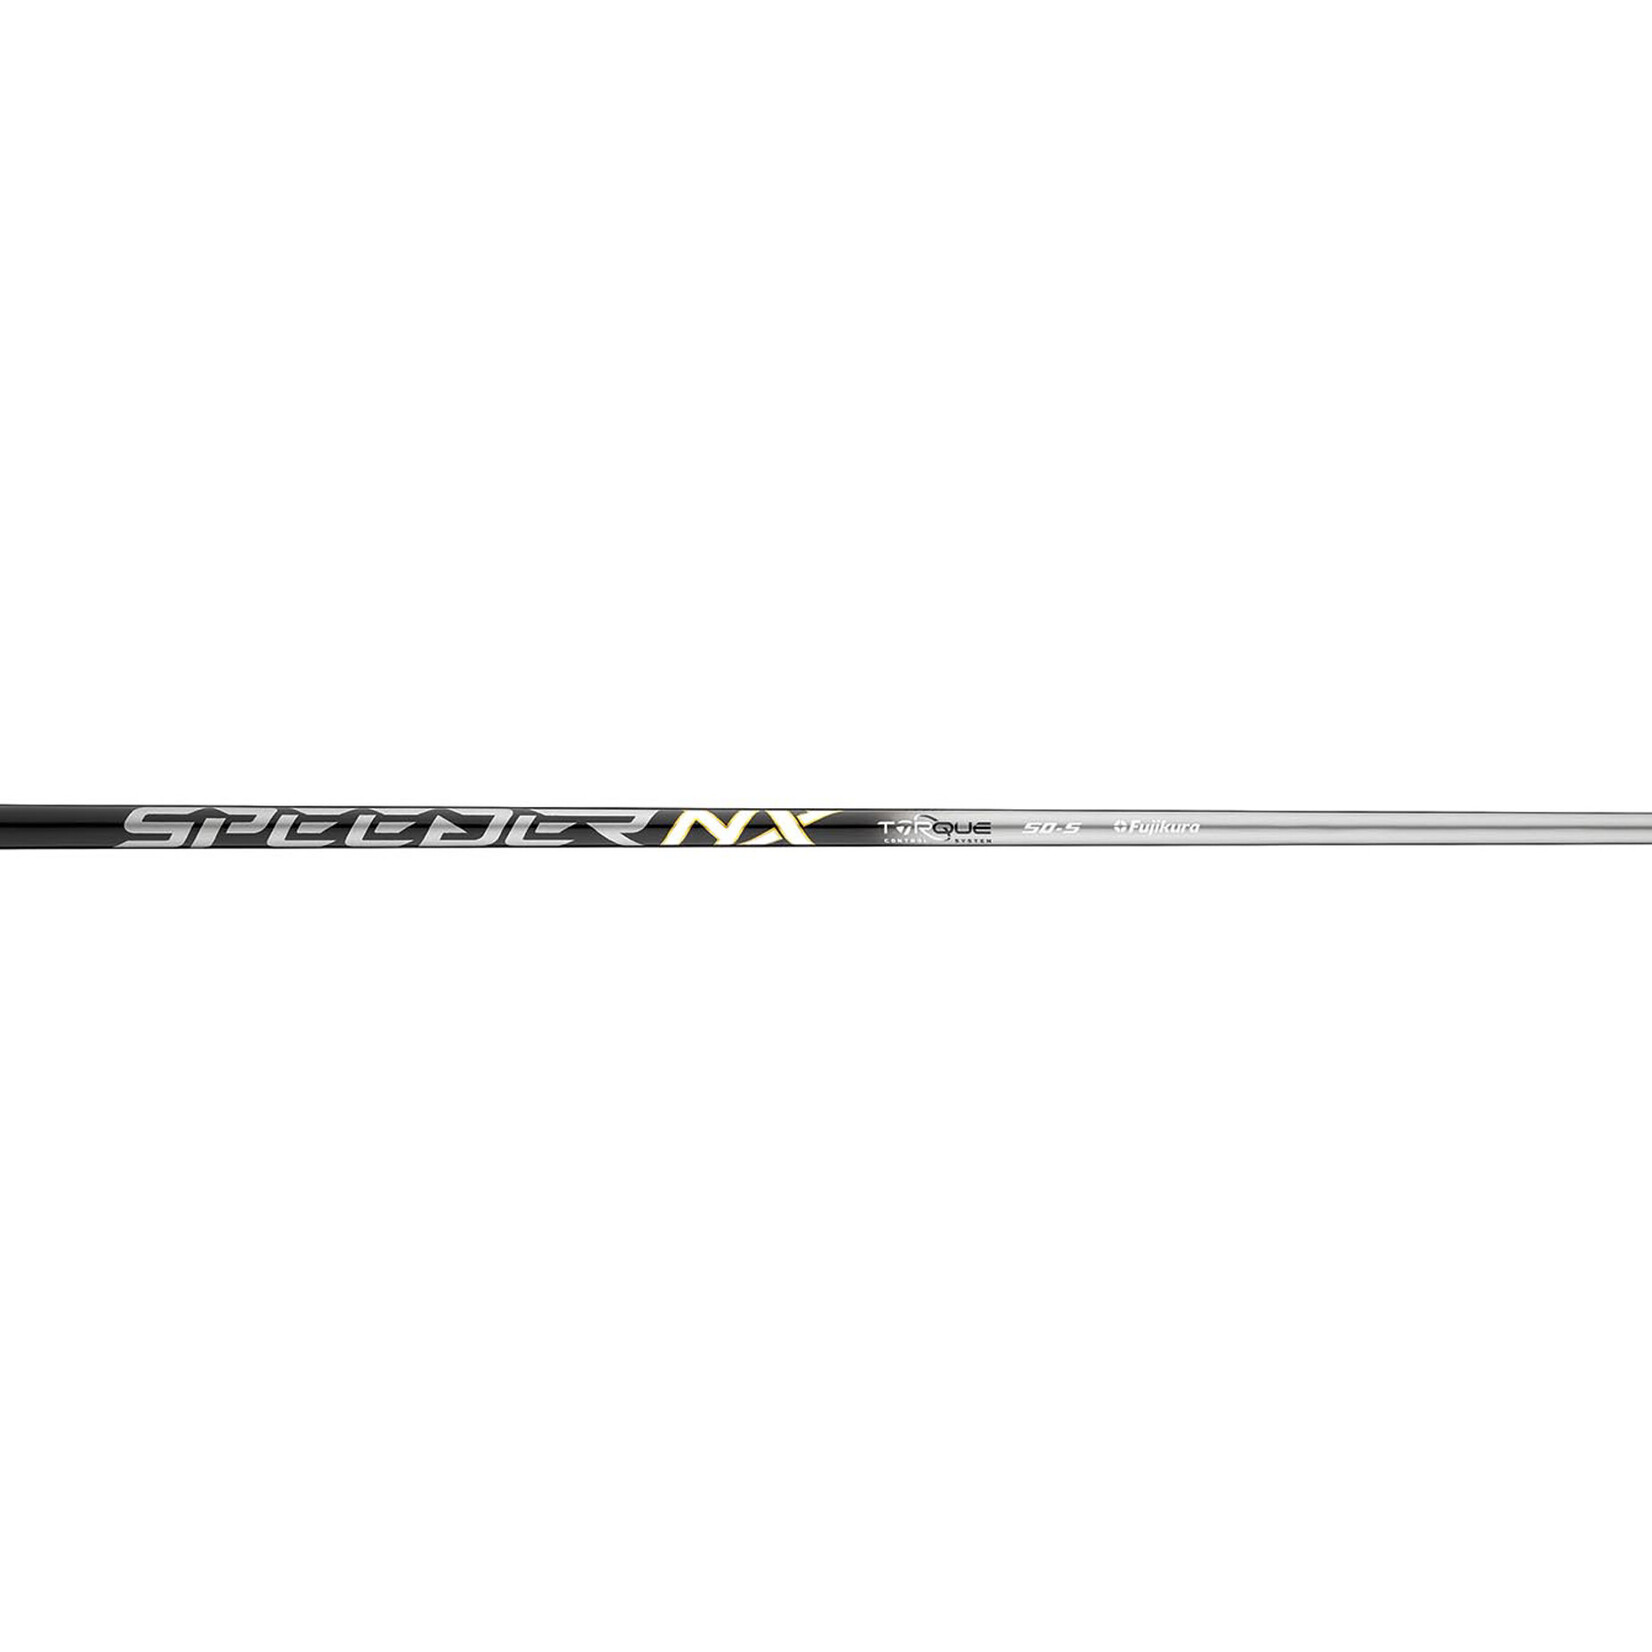 TAYLOR MADE TaylorMade Driver Shaft - sold with driver